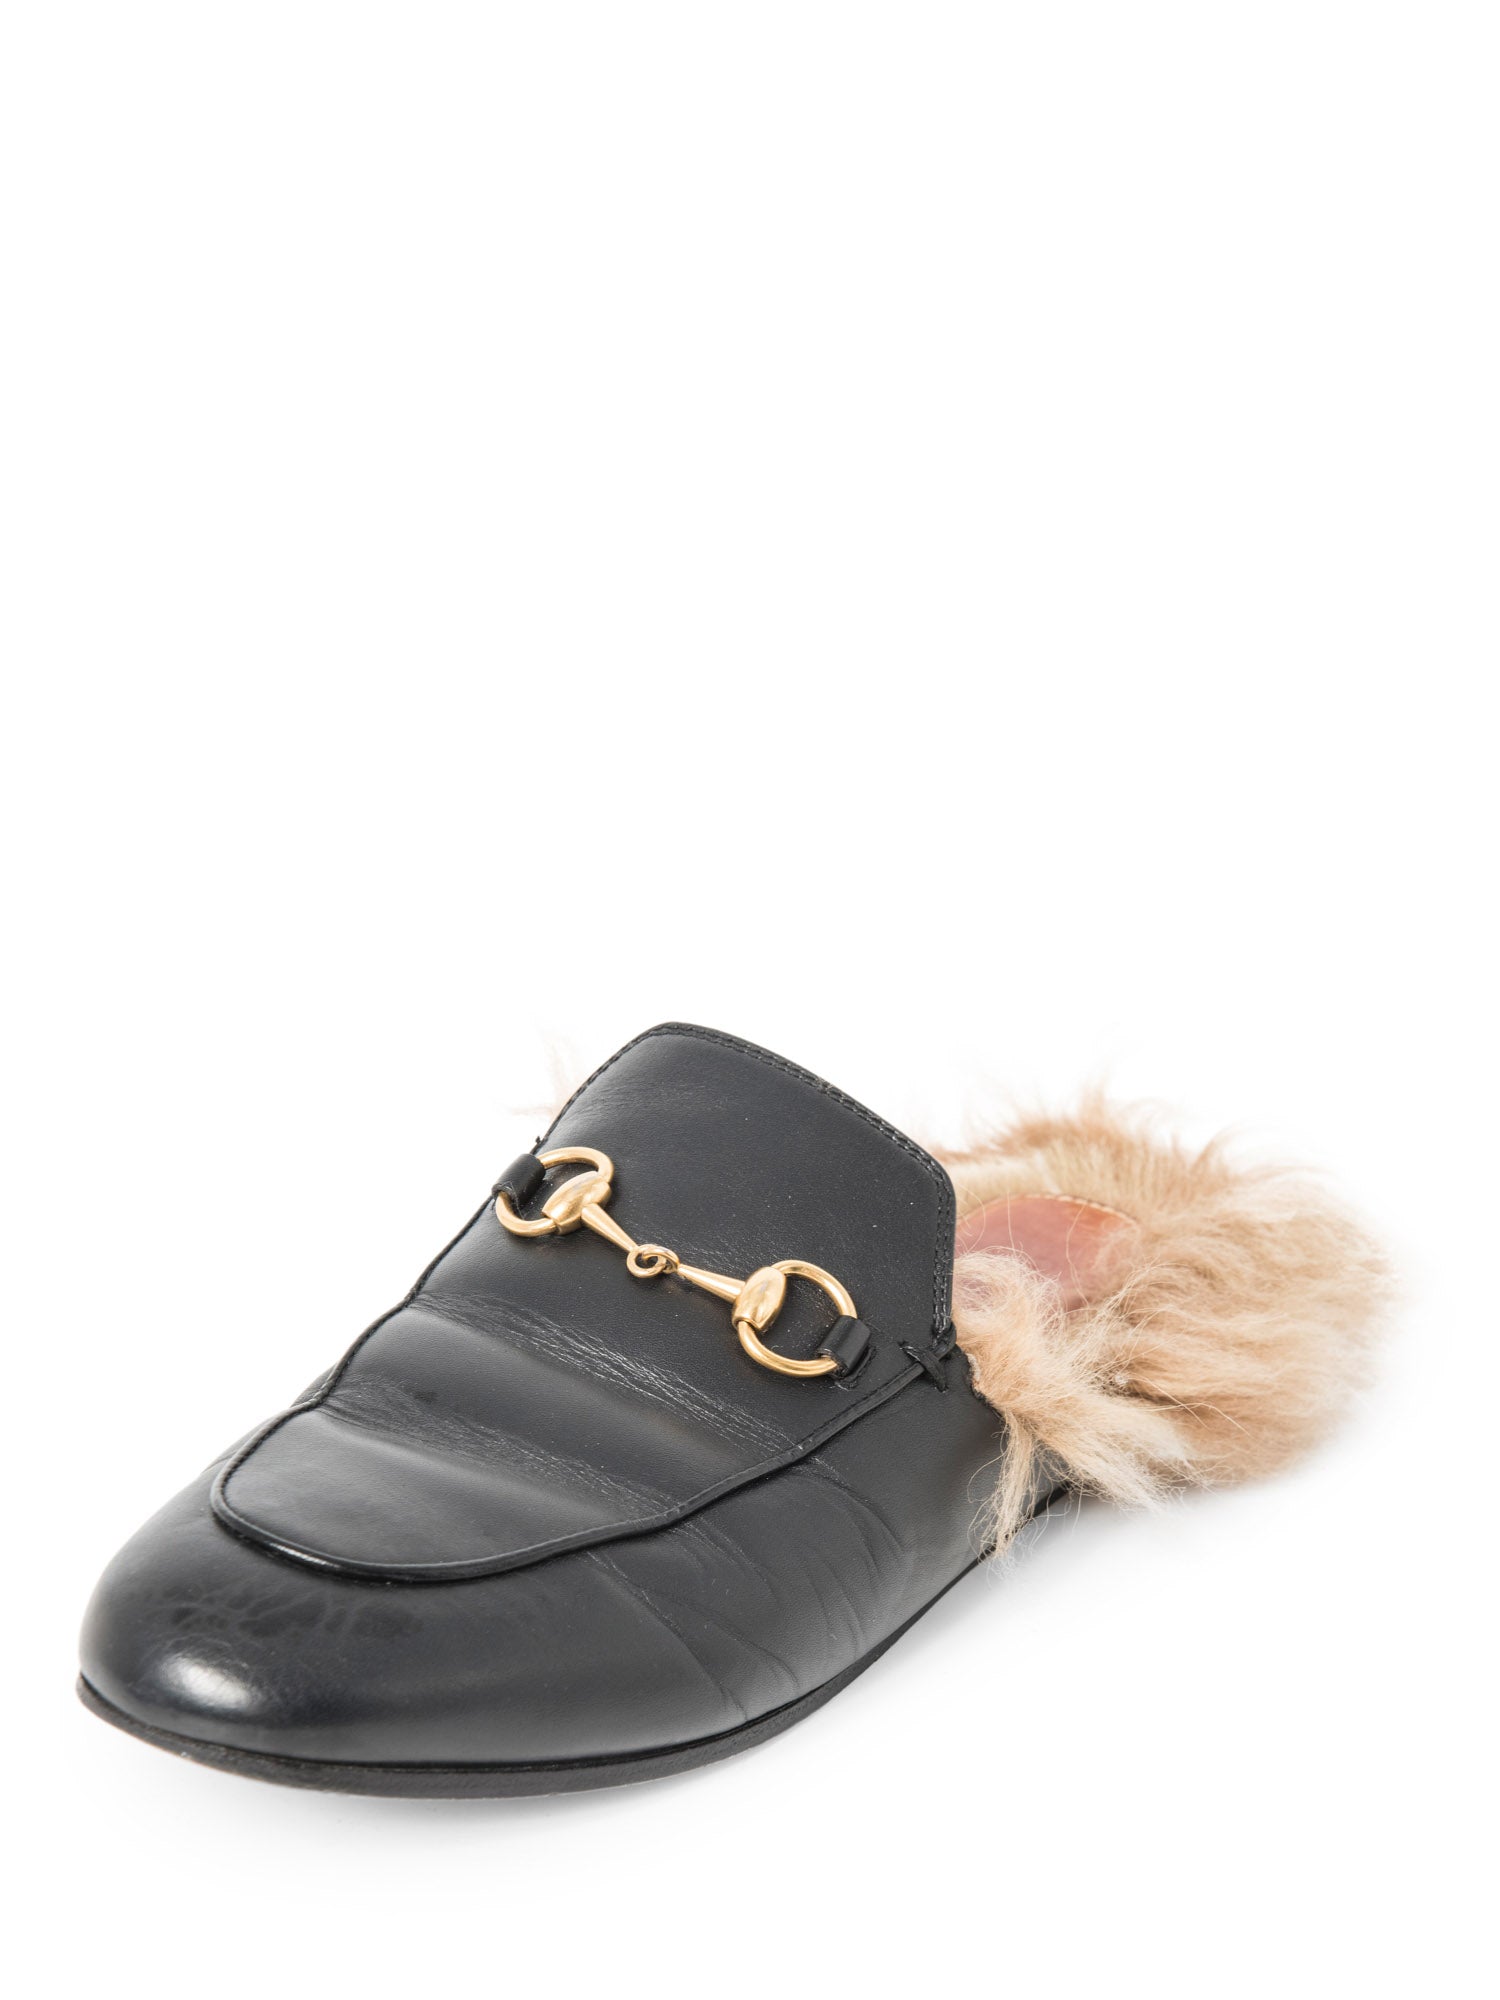 Gucci Leather Horsebit Fur Lined Loafers Black Gold